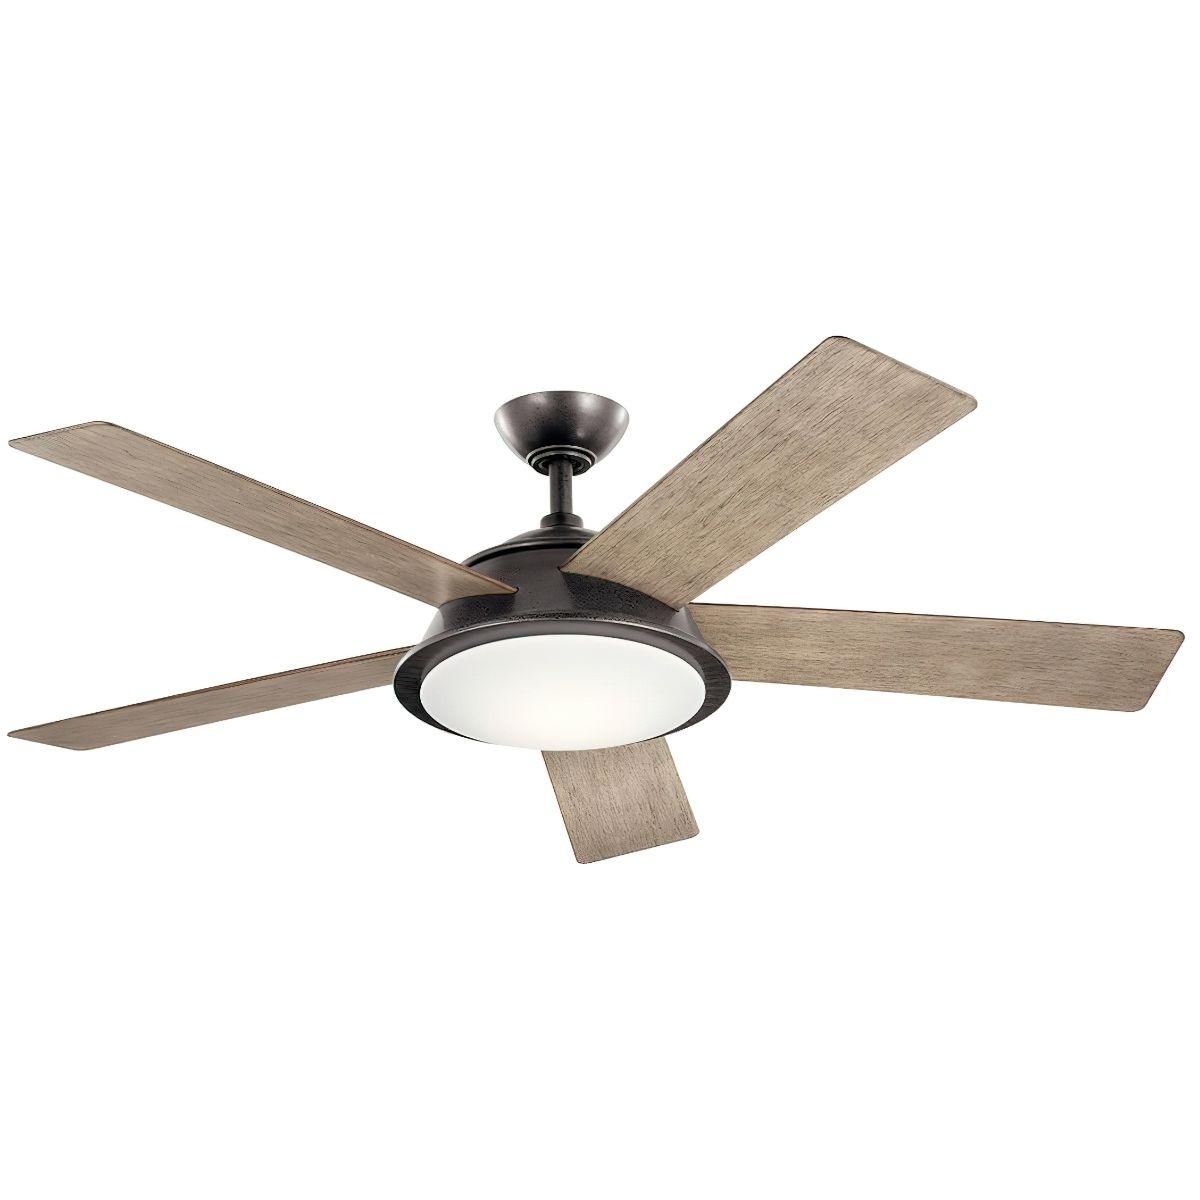 Verdi 56 Inch Coastal Indoor/Outdoor Ceiling Fan With Light And Remote - Bees Lighting